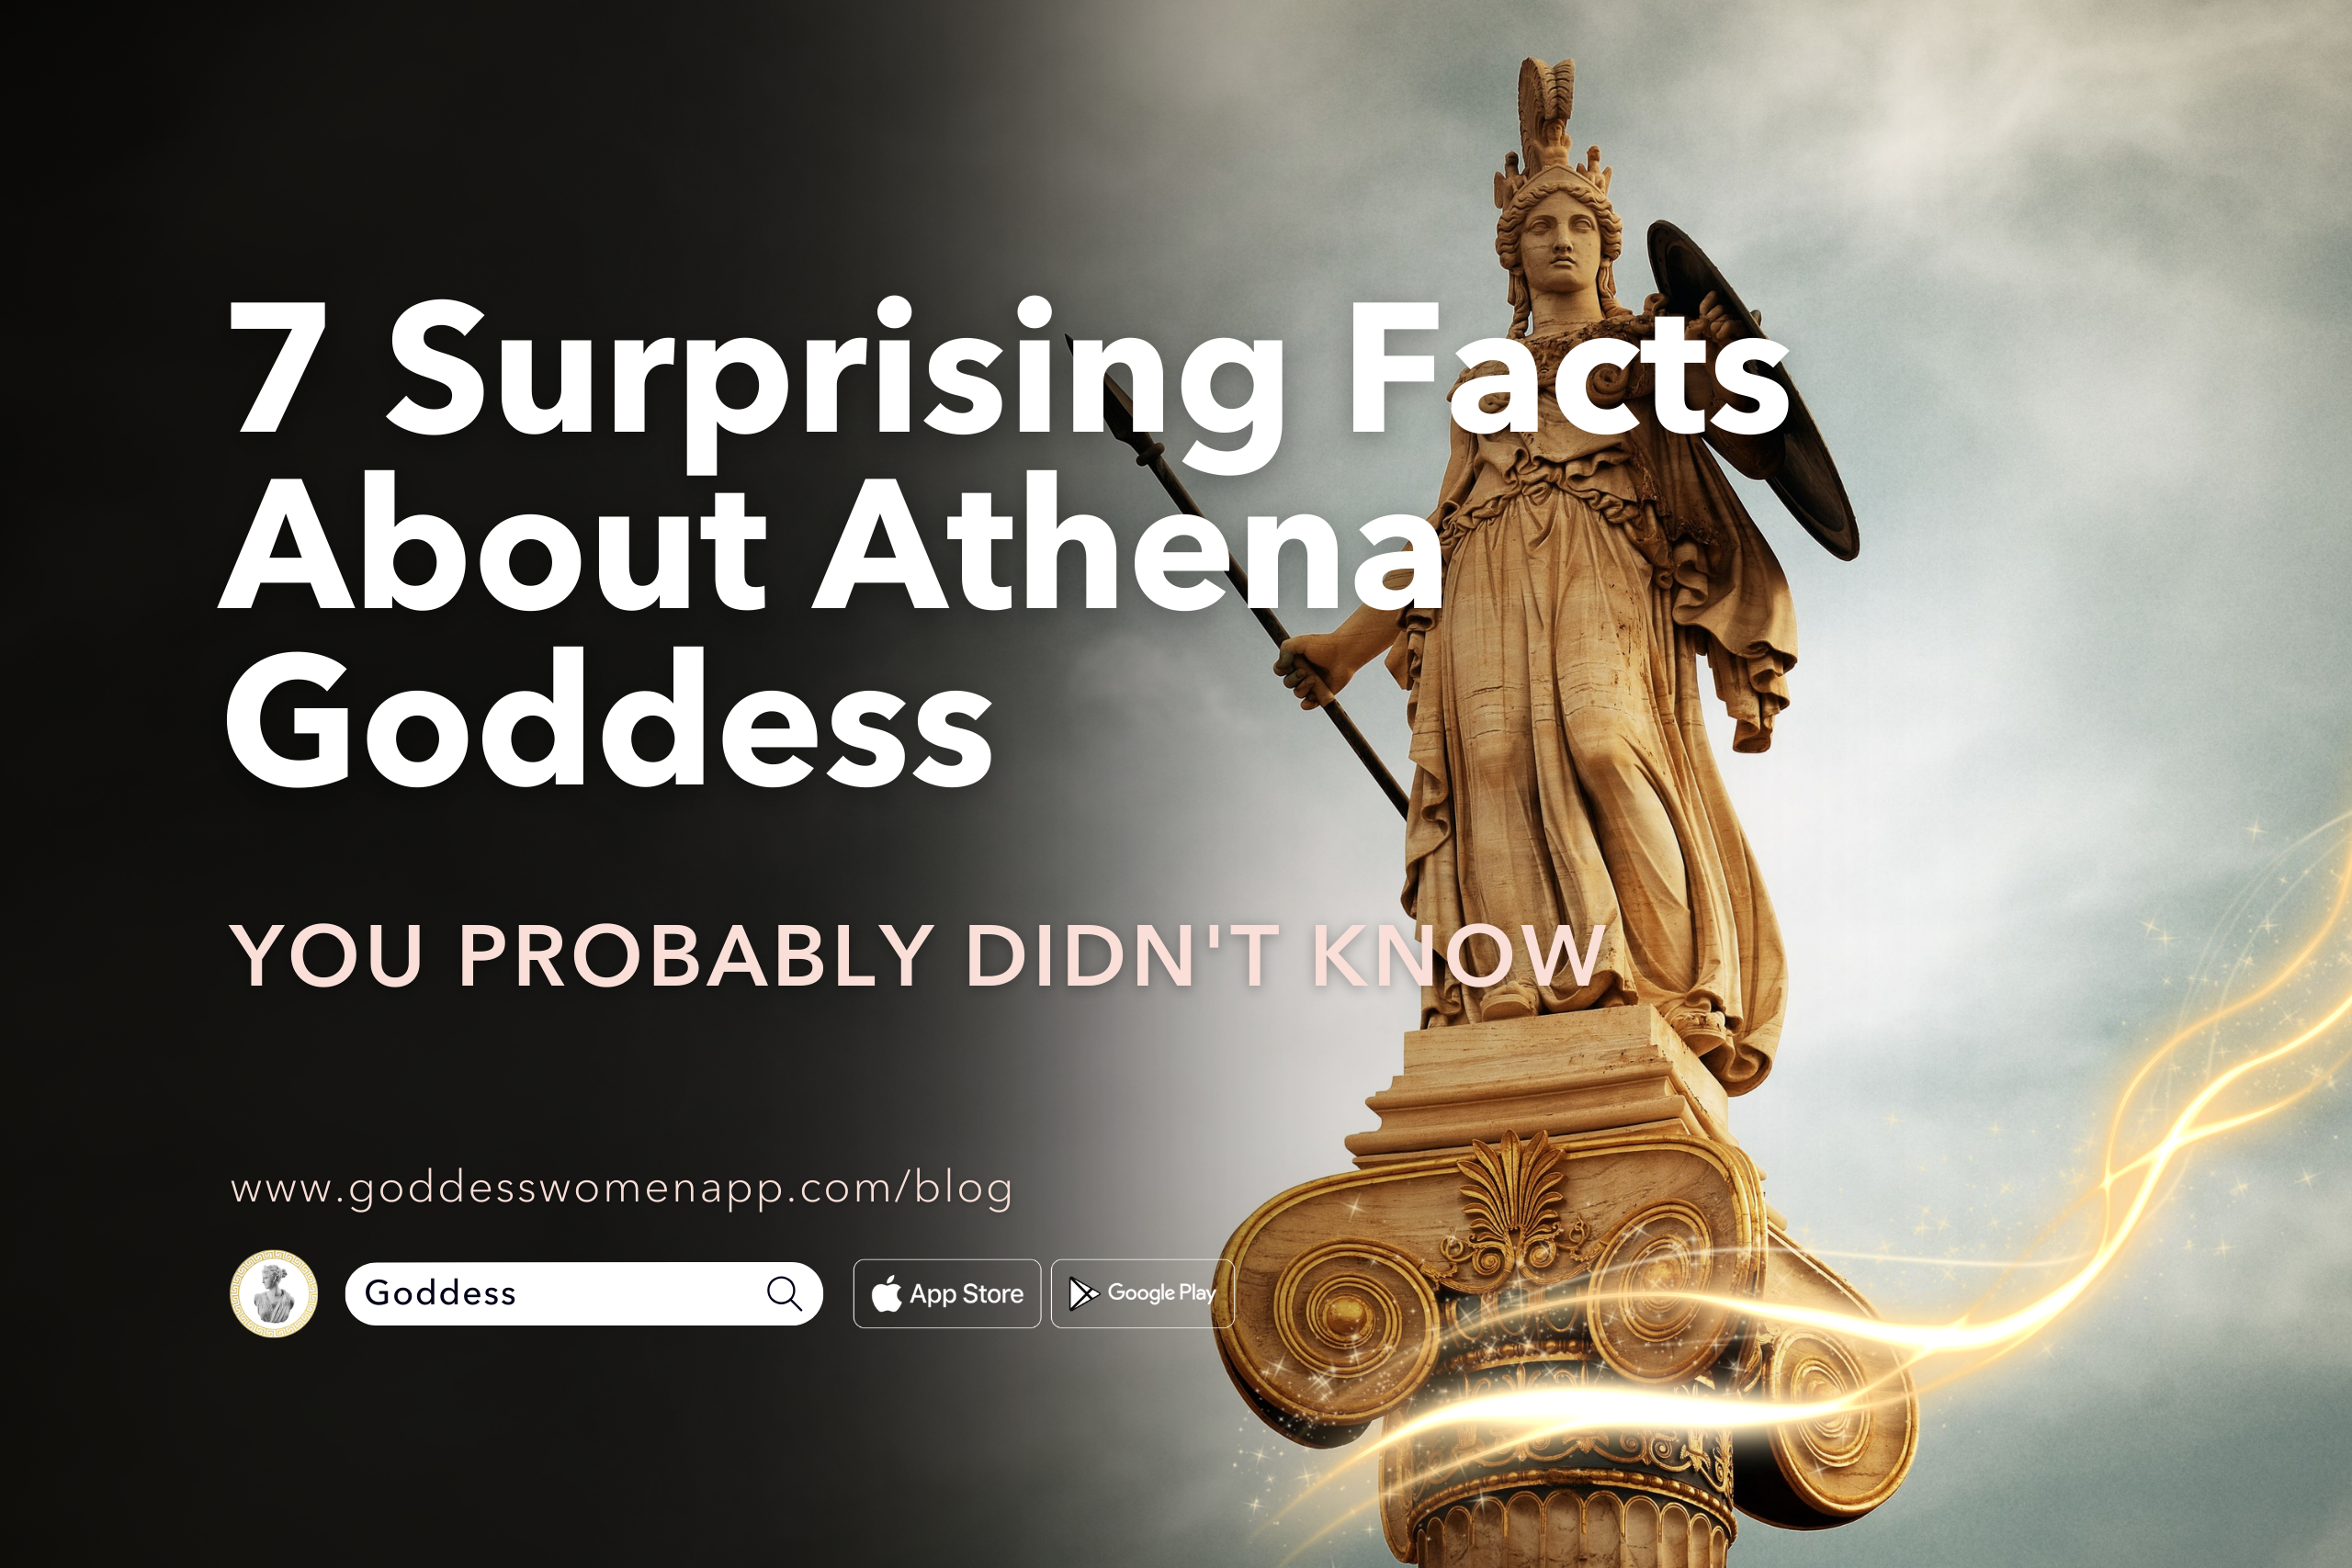 7 Surprising Facts About Athena Goddess You Probably Didn’t Know